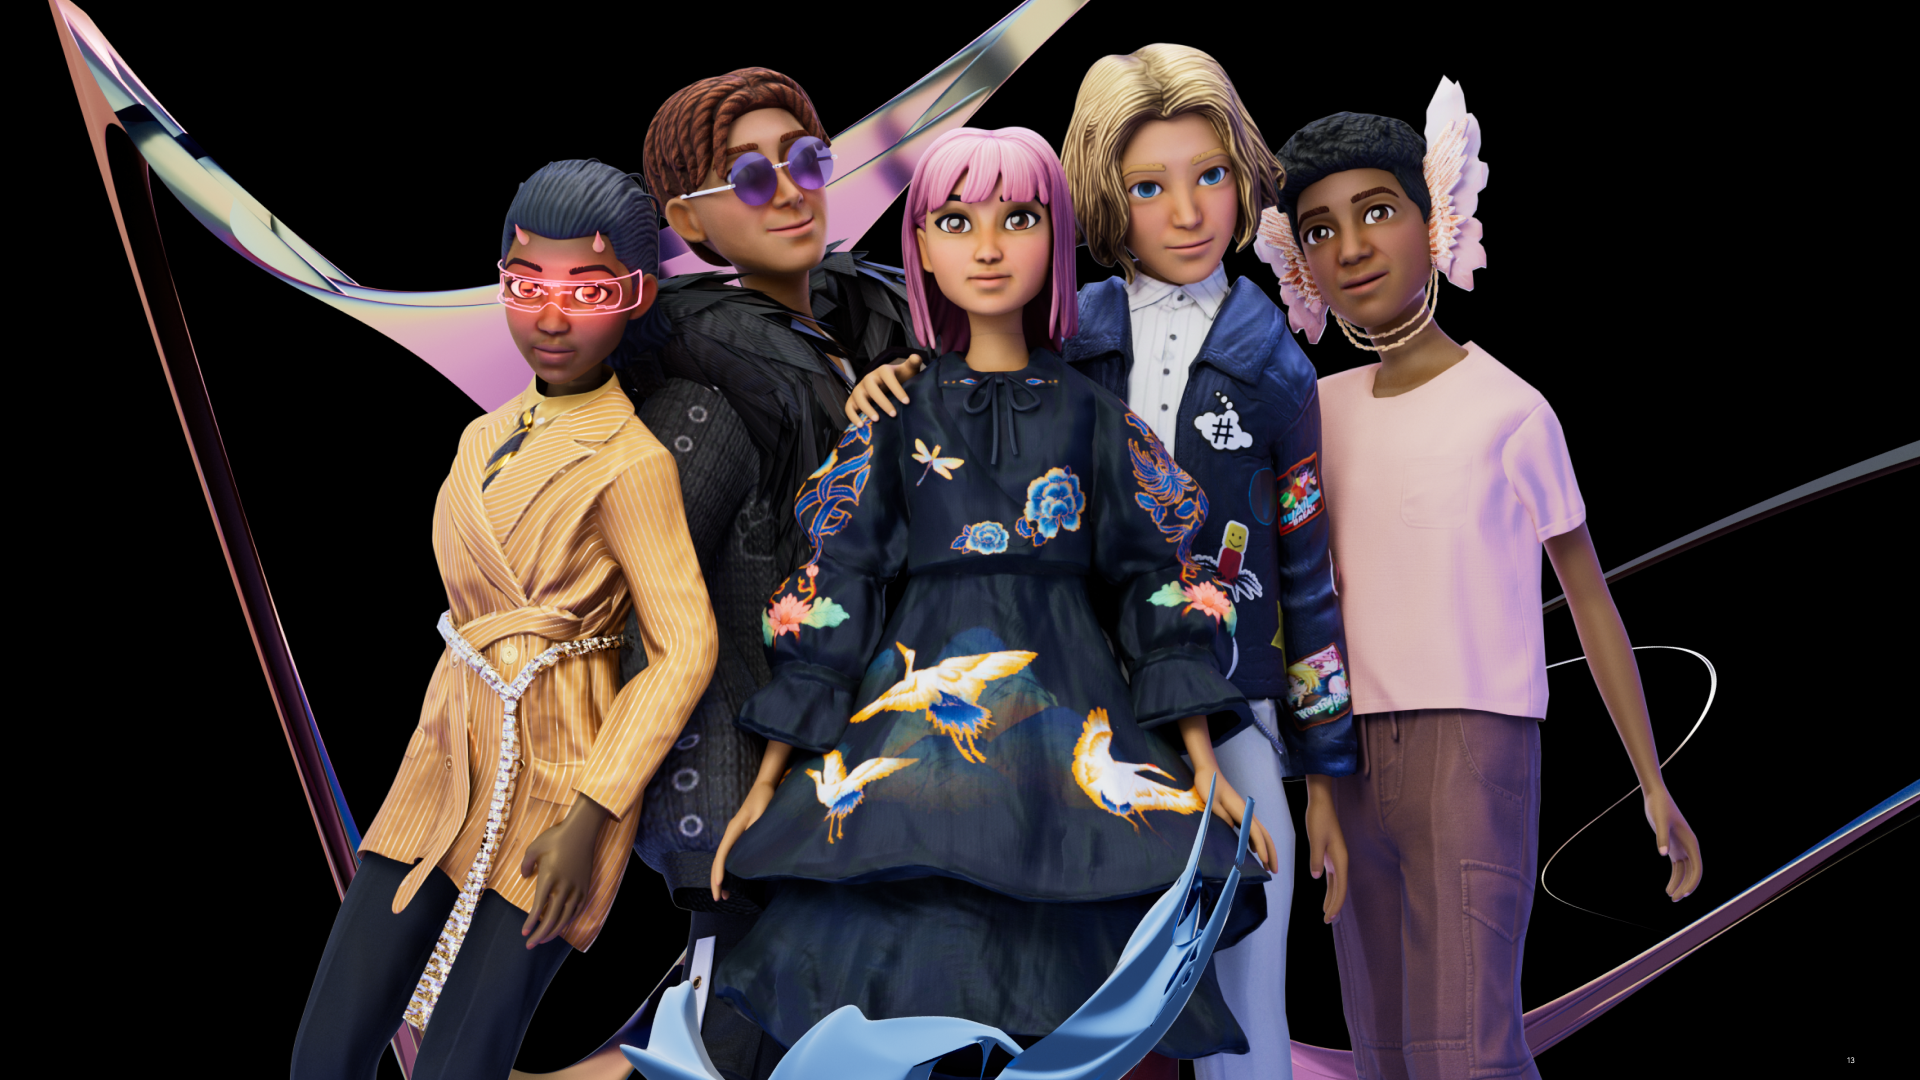 Roblox report: Digital fashion is alive and well for Gen Z